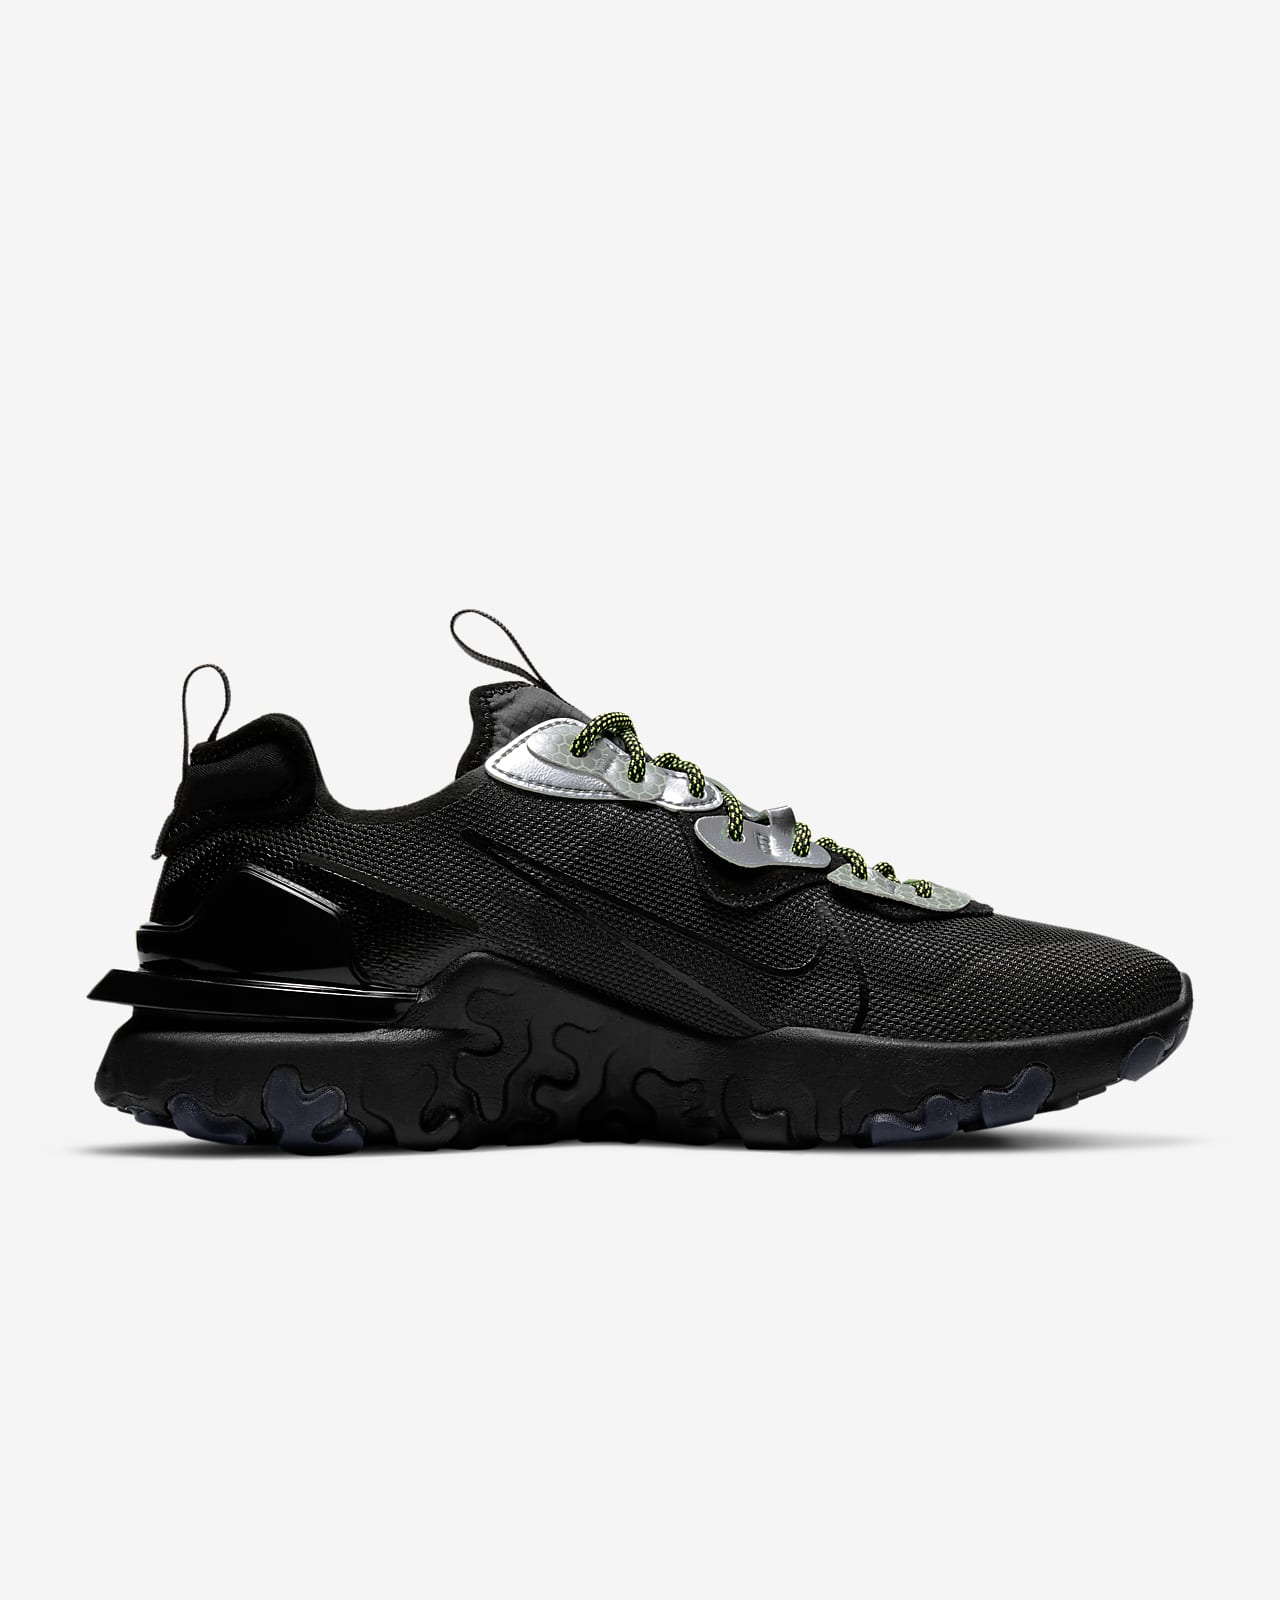 Nike React Vision Prm 3m Trainer new 